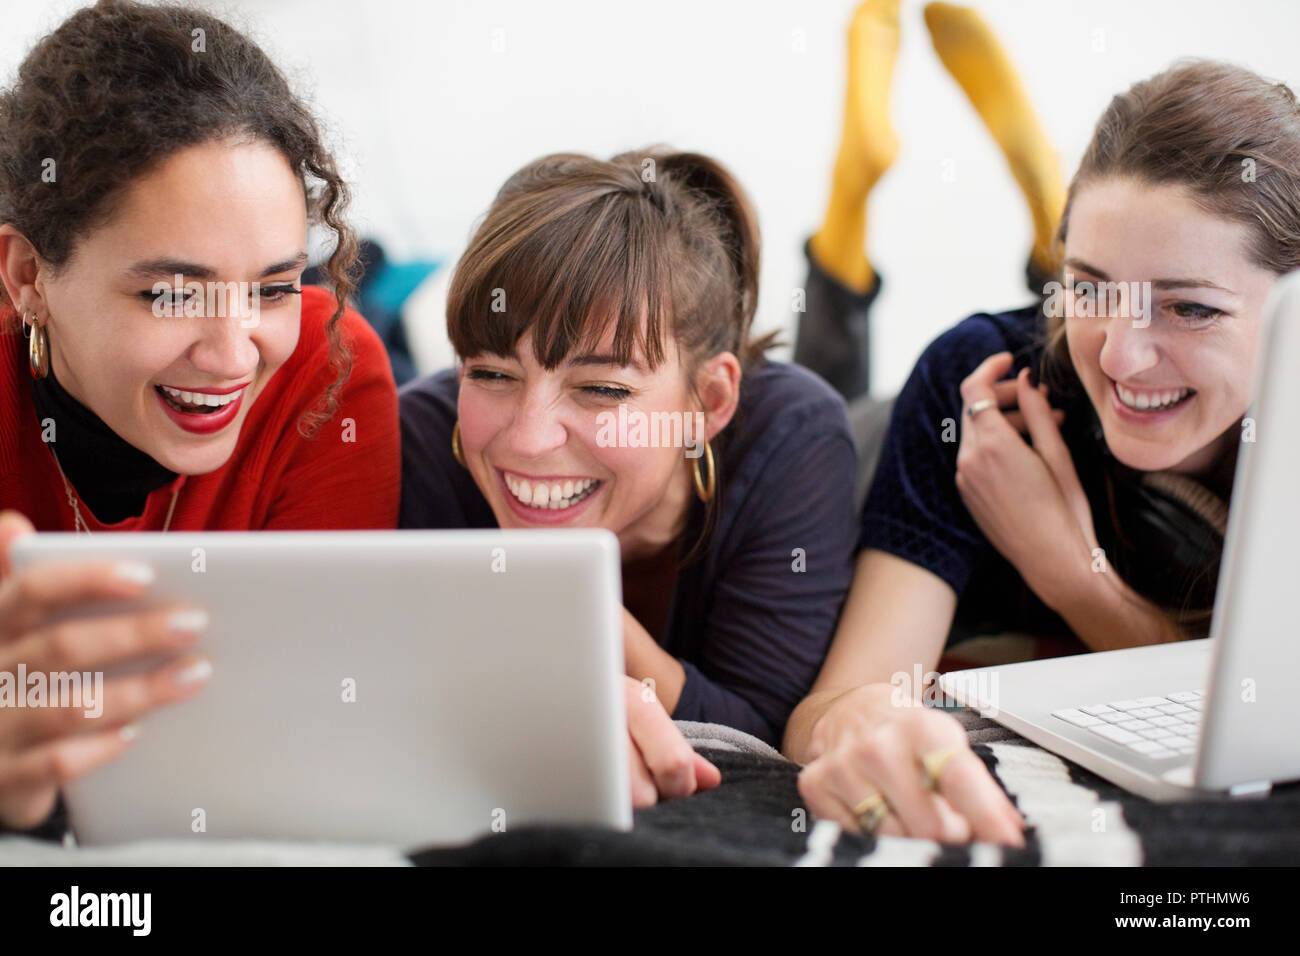 Laughing young women friends hanging out, enjoying digital tablet and laptop on bed Stock Photo